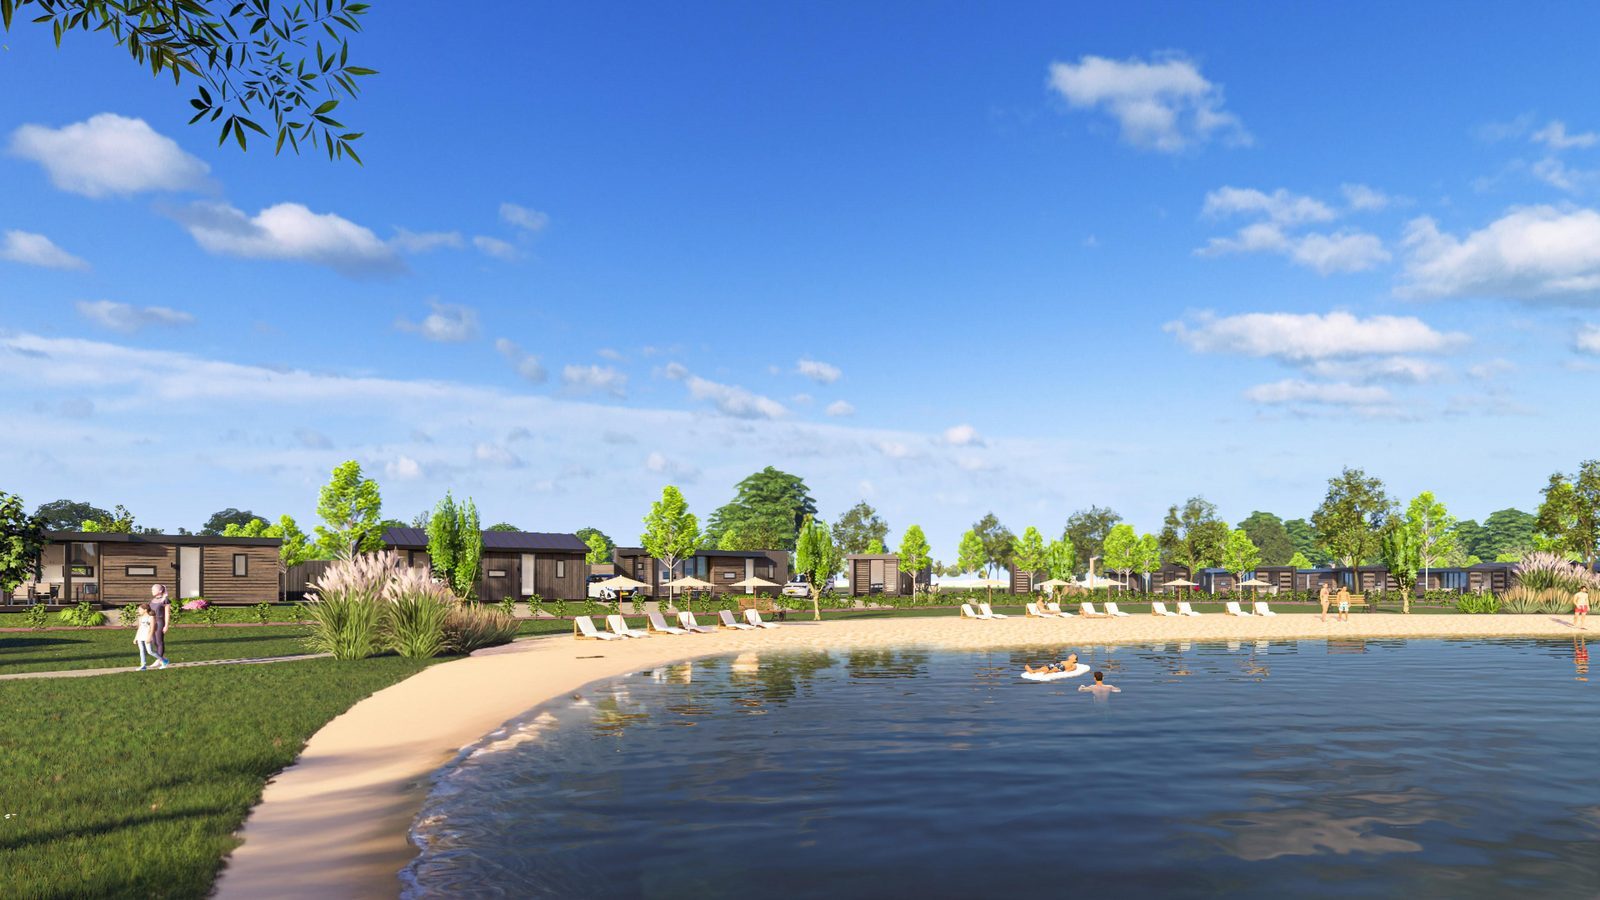 First steps made towards new holiday park Lexmond.